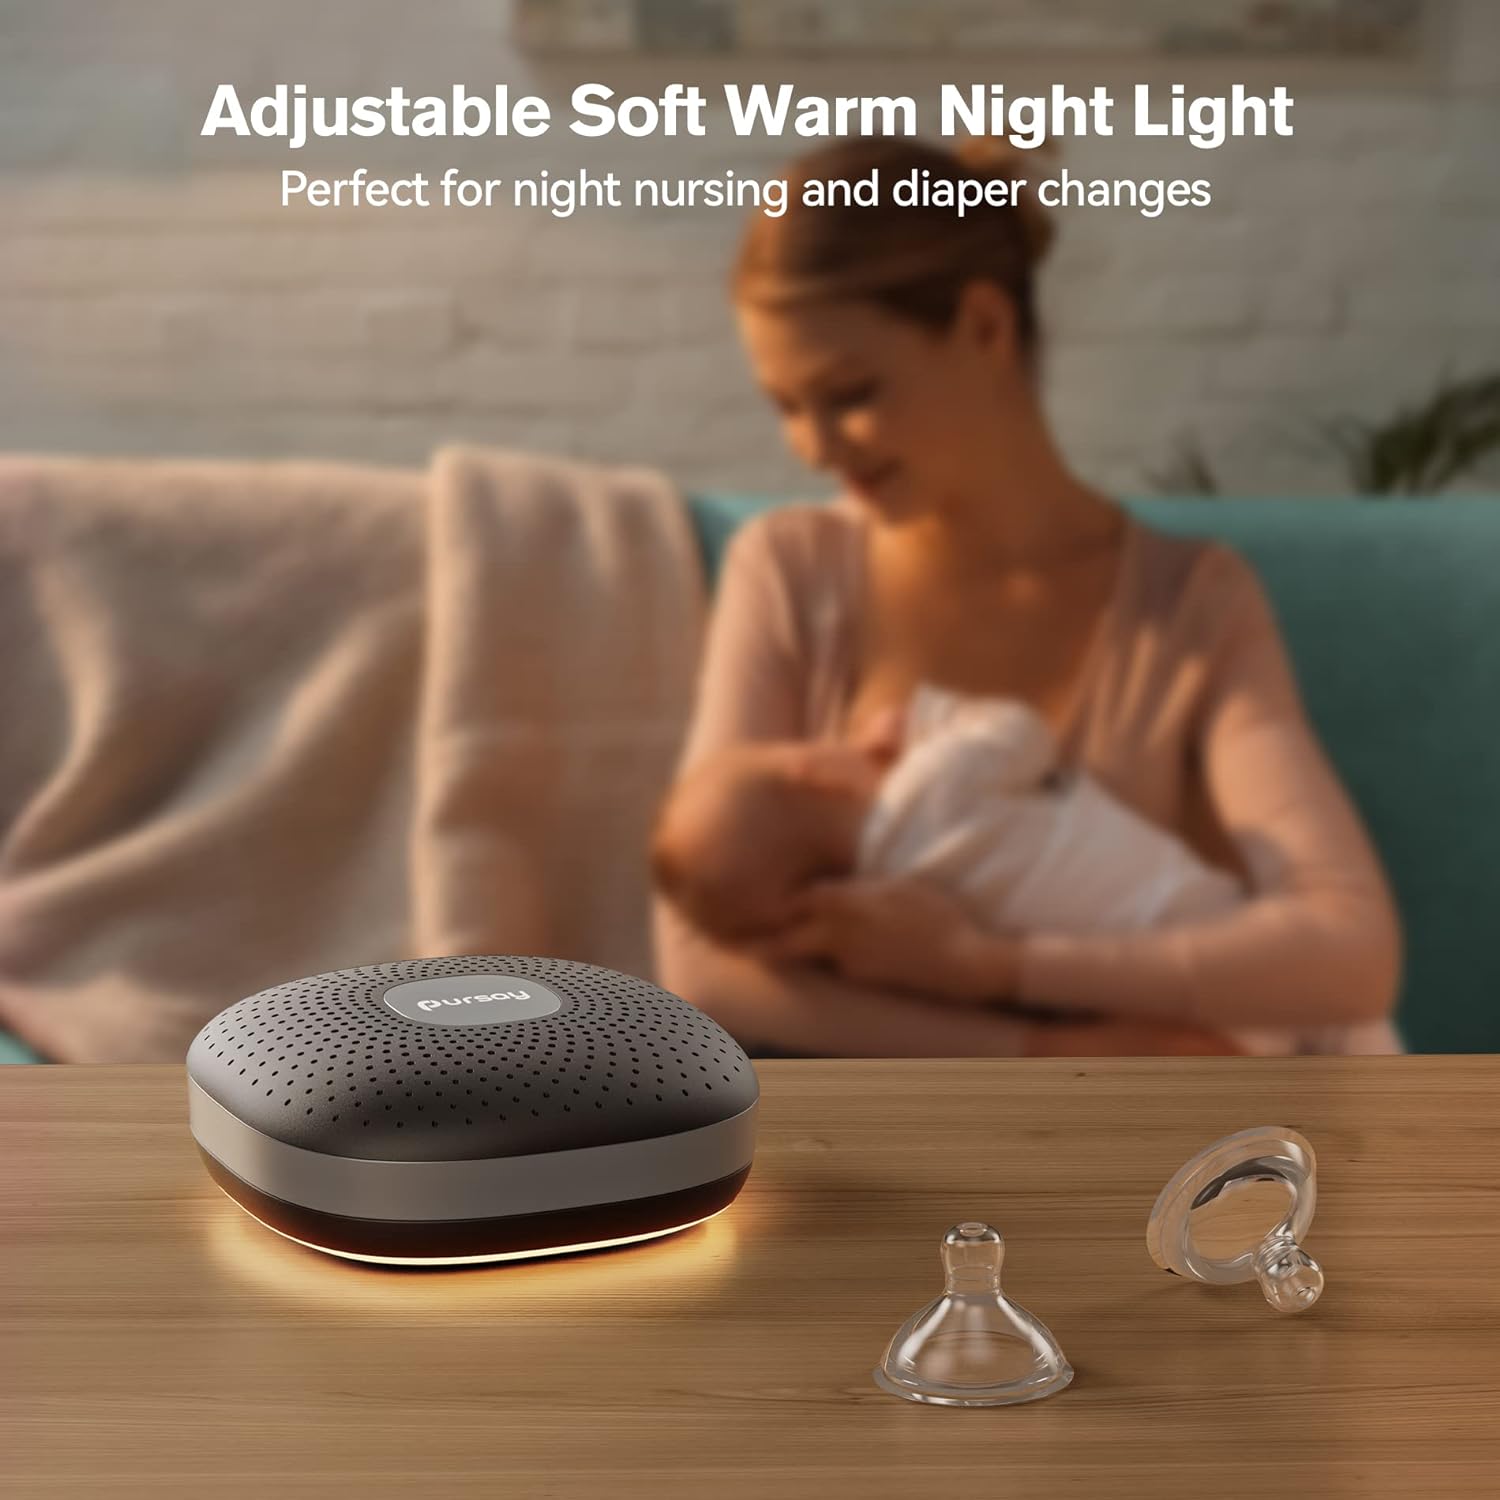 White Noise Machine for Adult Sleeping/Relieving Stress, Pursay Portable Sleep Sound Therapy Machine for Home, Office,Travel,Adjustable Night Light Brightness,1200MAH Battery Capacity